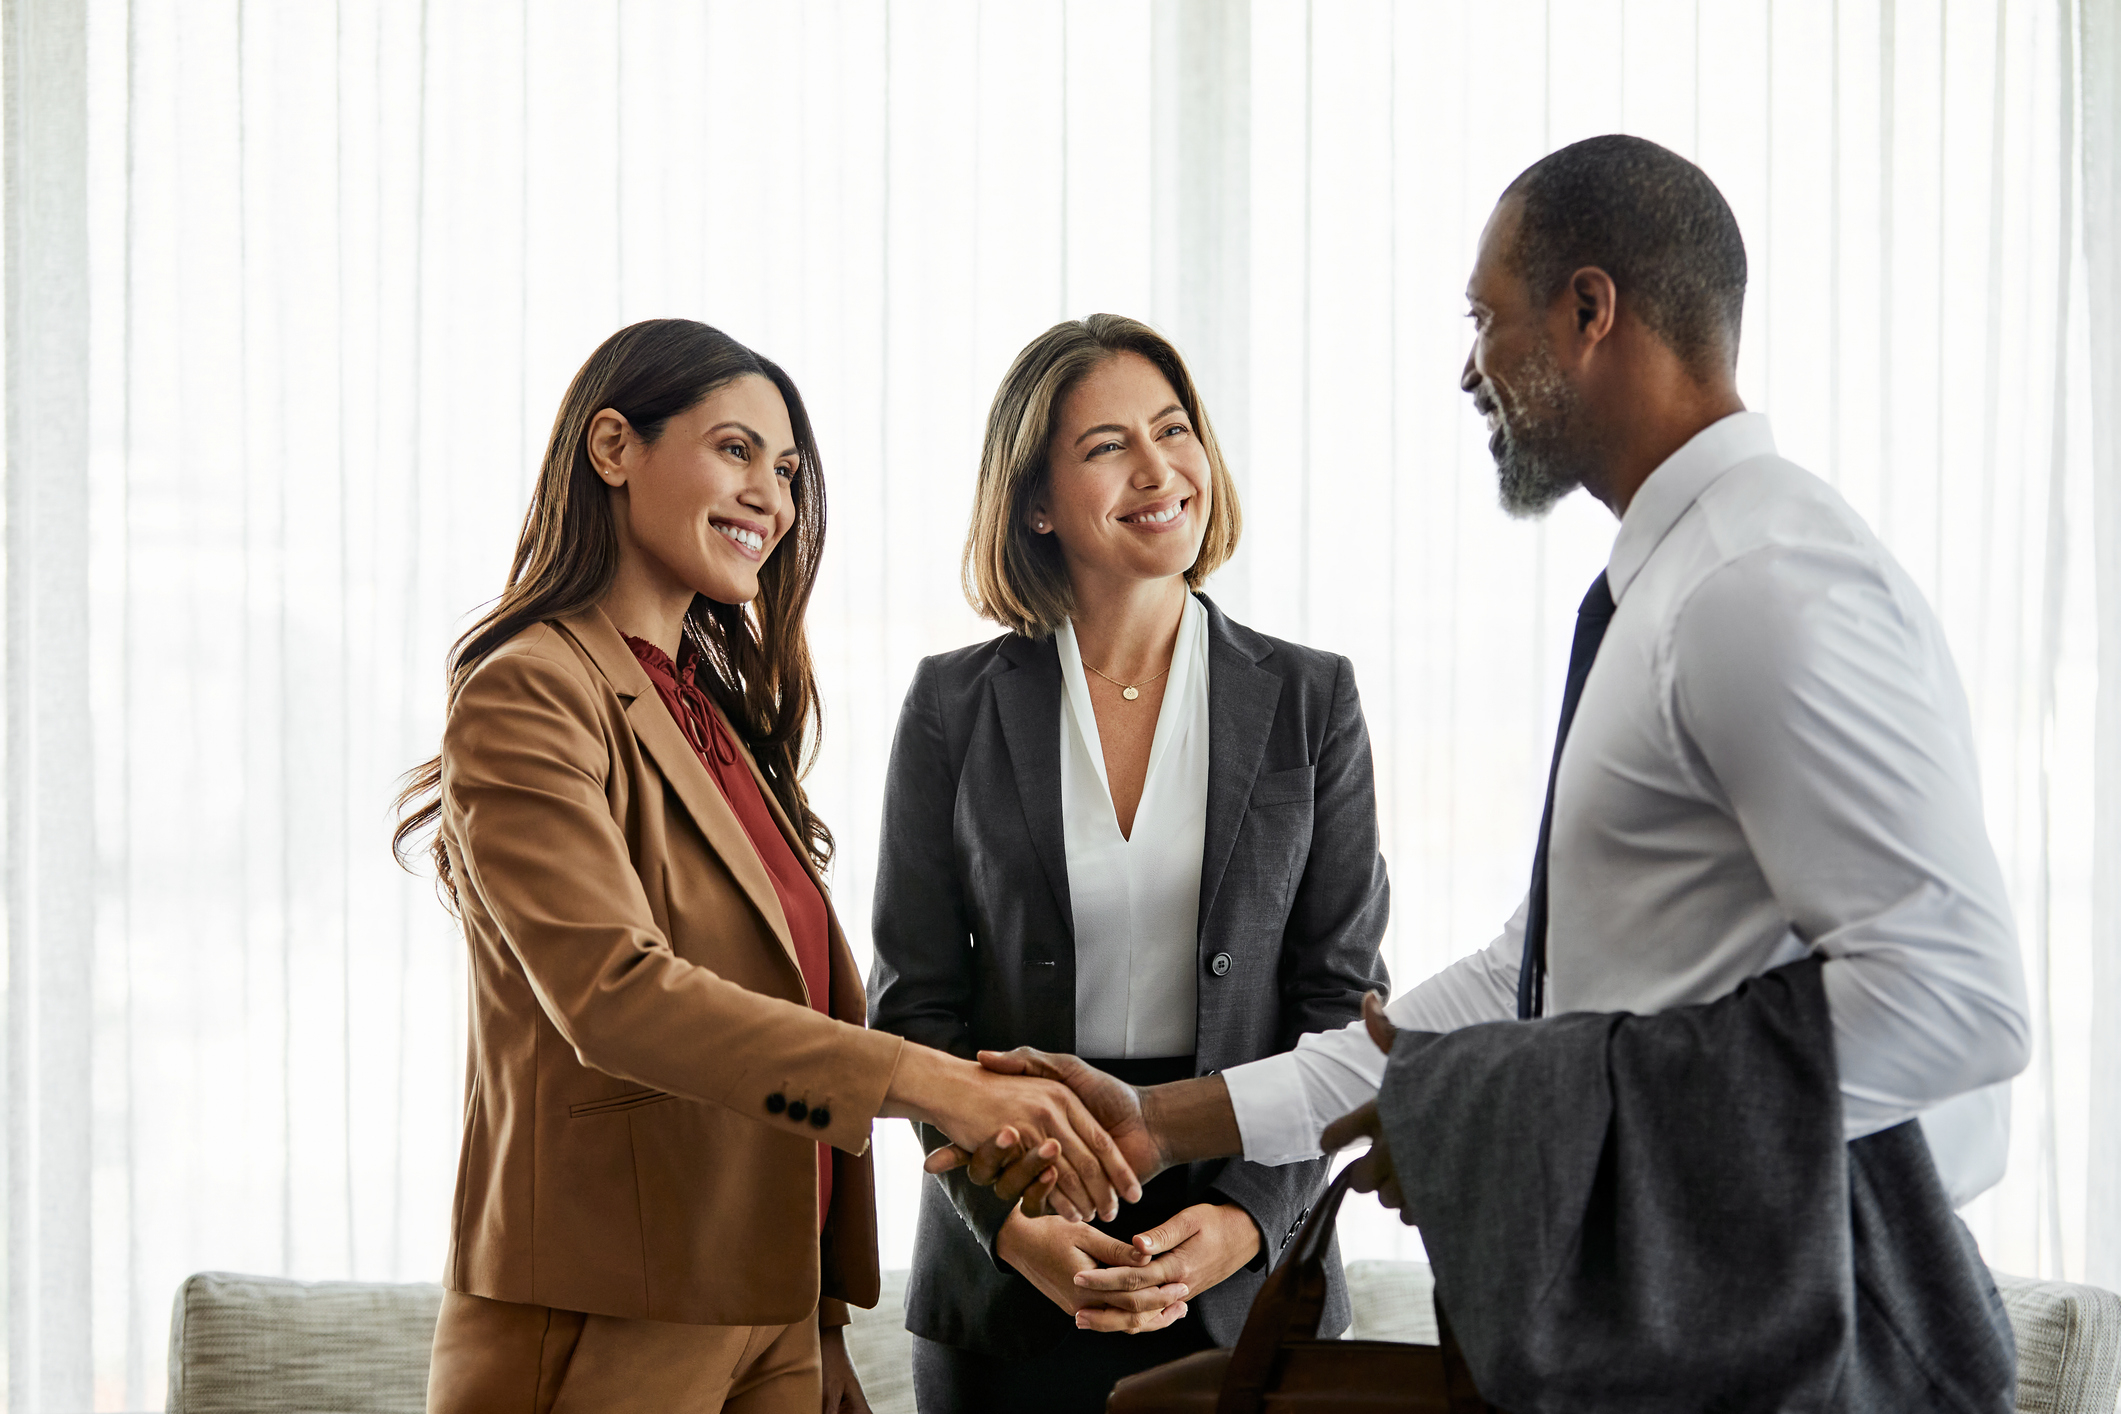 Three professionals shaking hands and smiling in a business setting